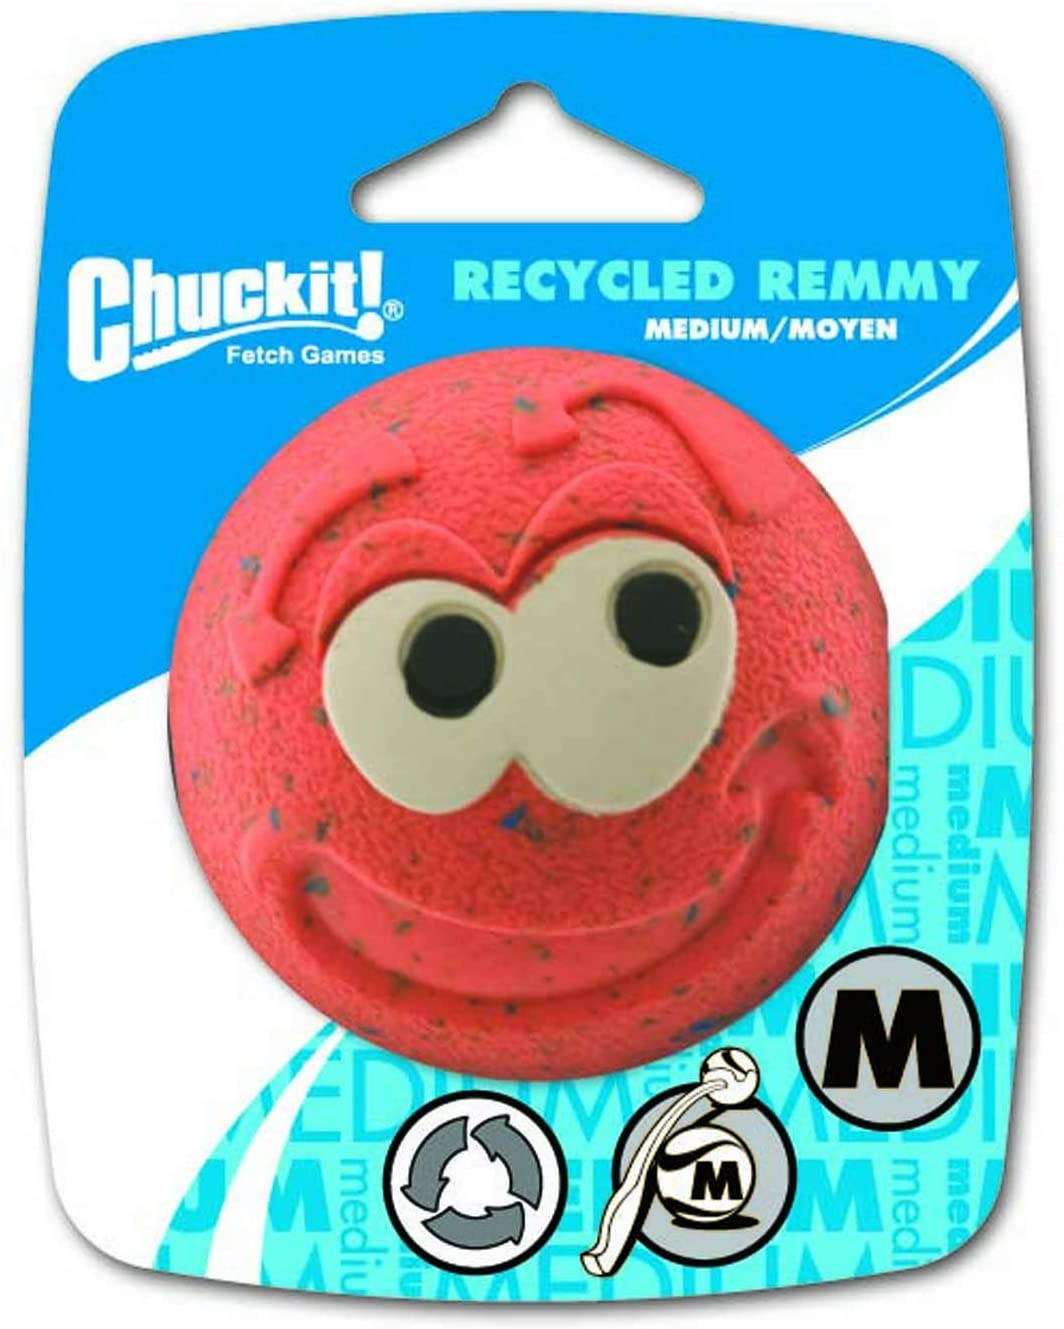 CHUCKIT RECYCLED REMMY